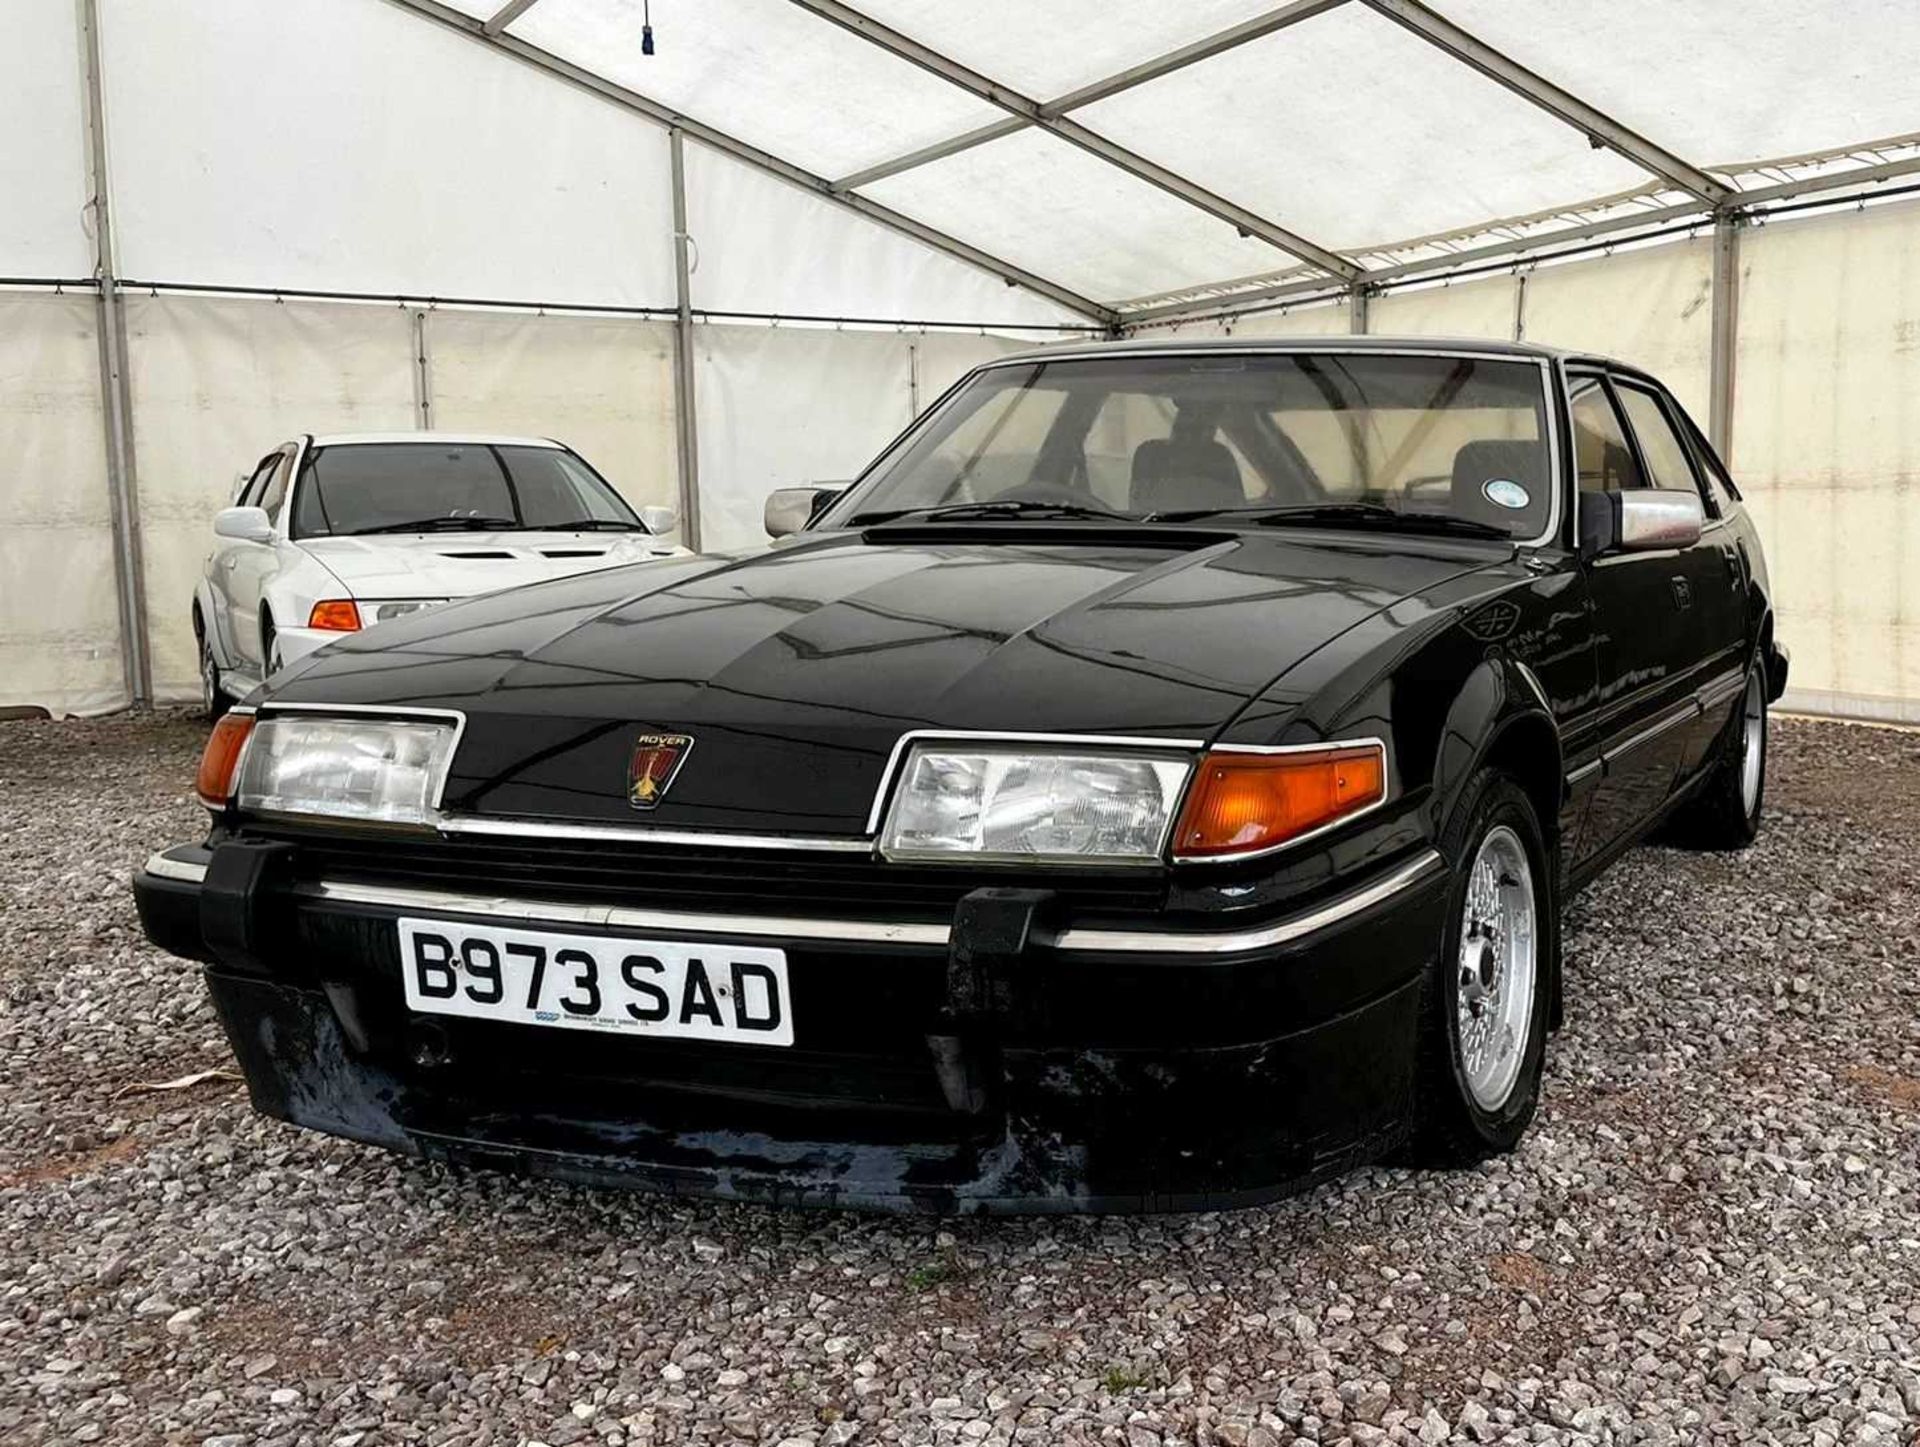 1985 Rover SD1 Vitesse One owner from new, in very original condition